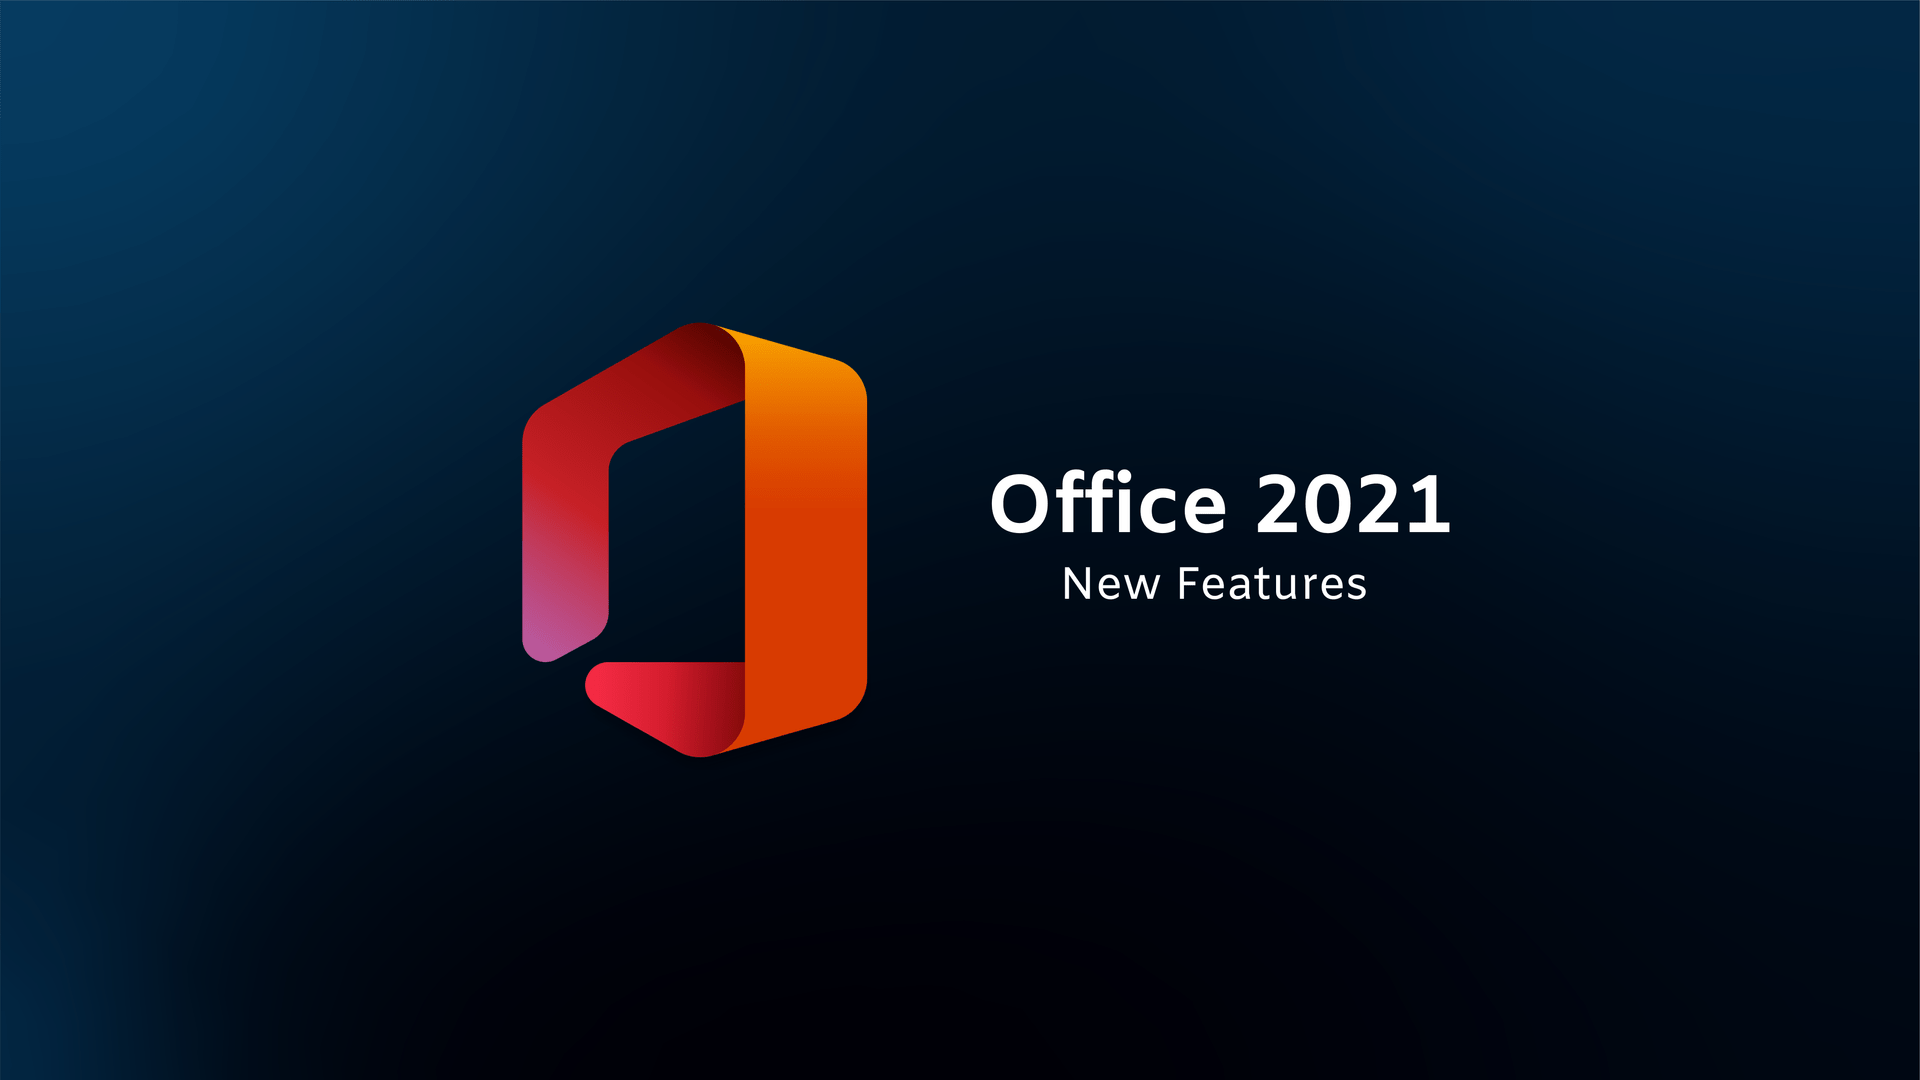 Office 2021 New Features